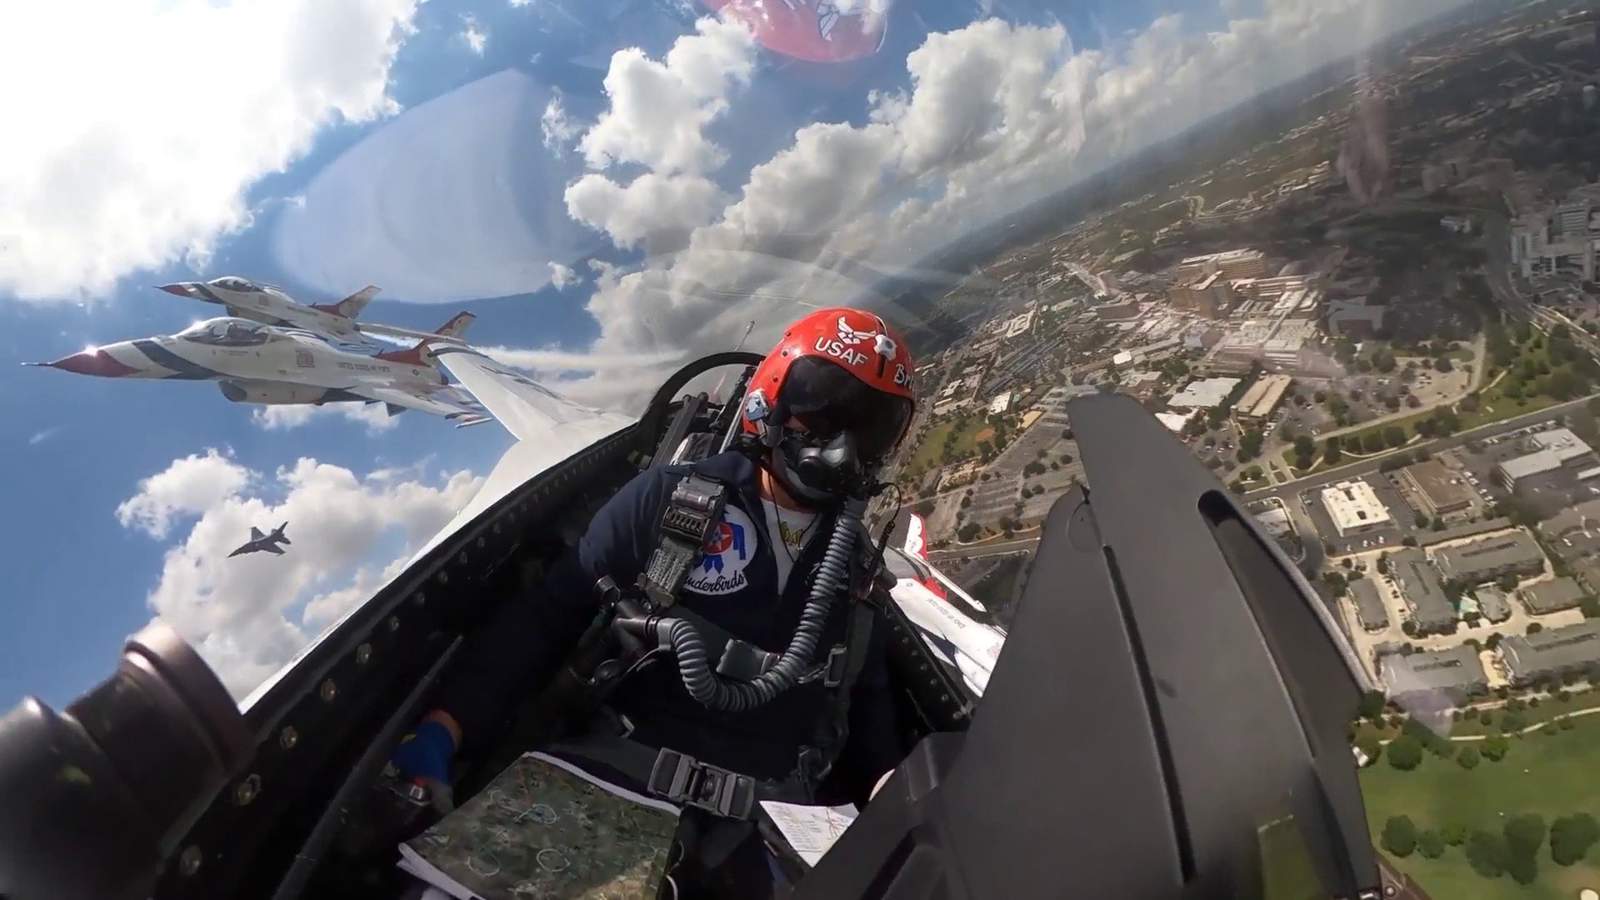 Fly with the Thunderbirds! Watch the San Antonio flyover from the cockpit of an F-16